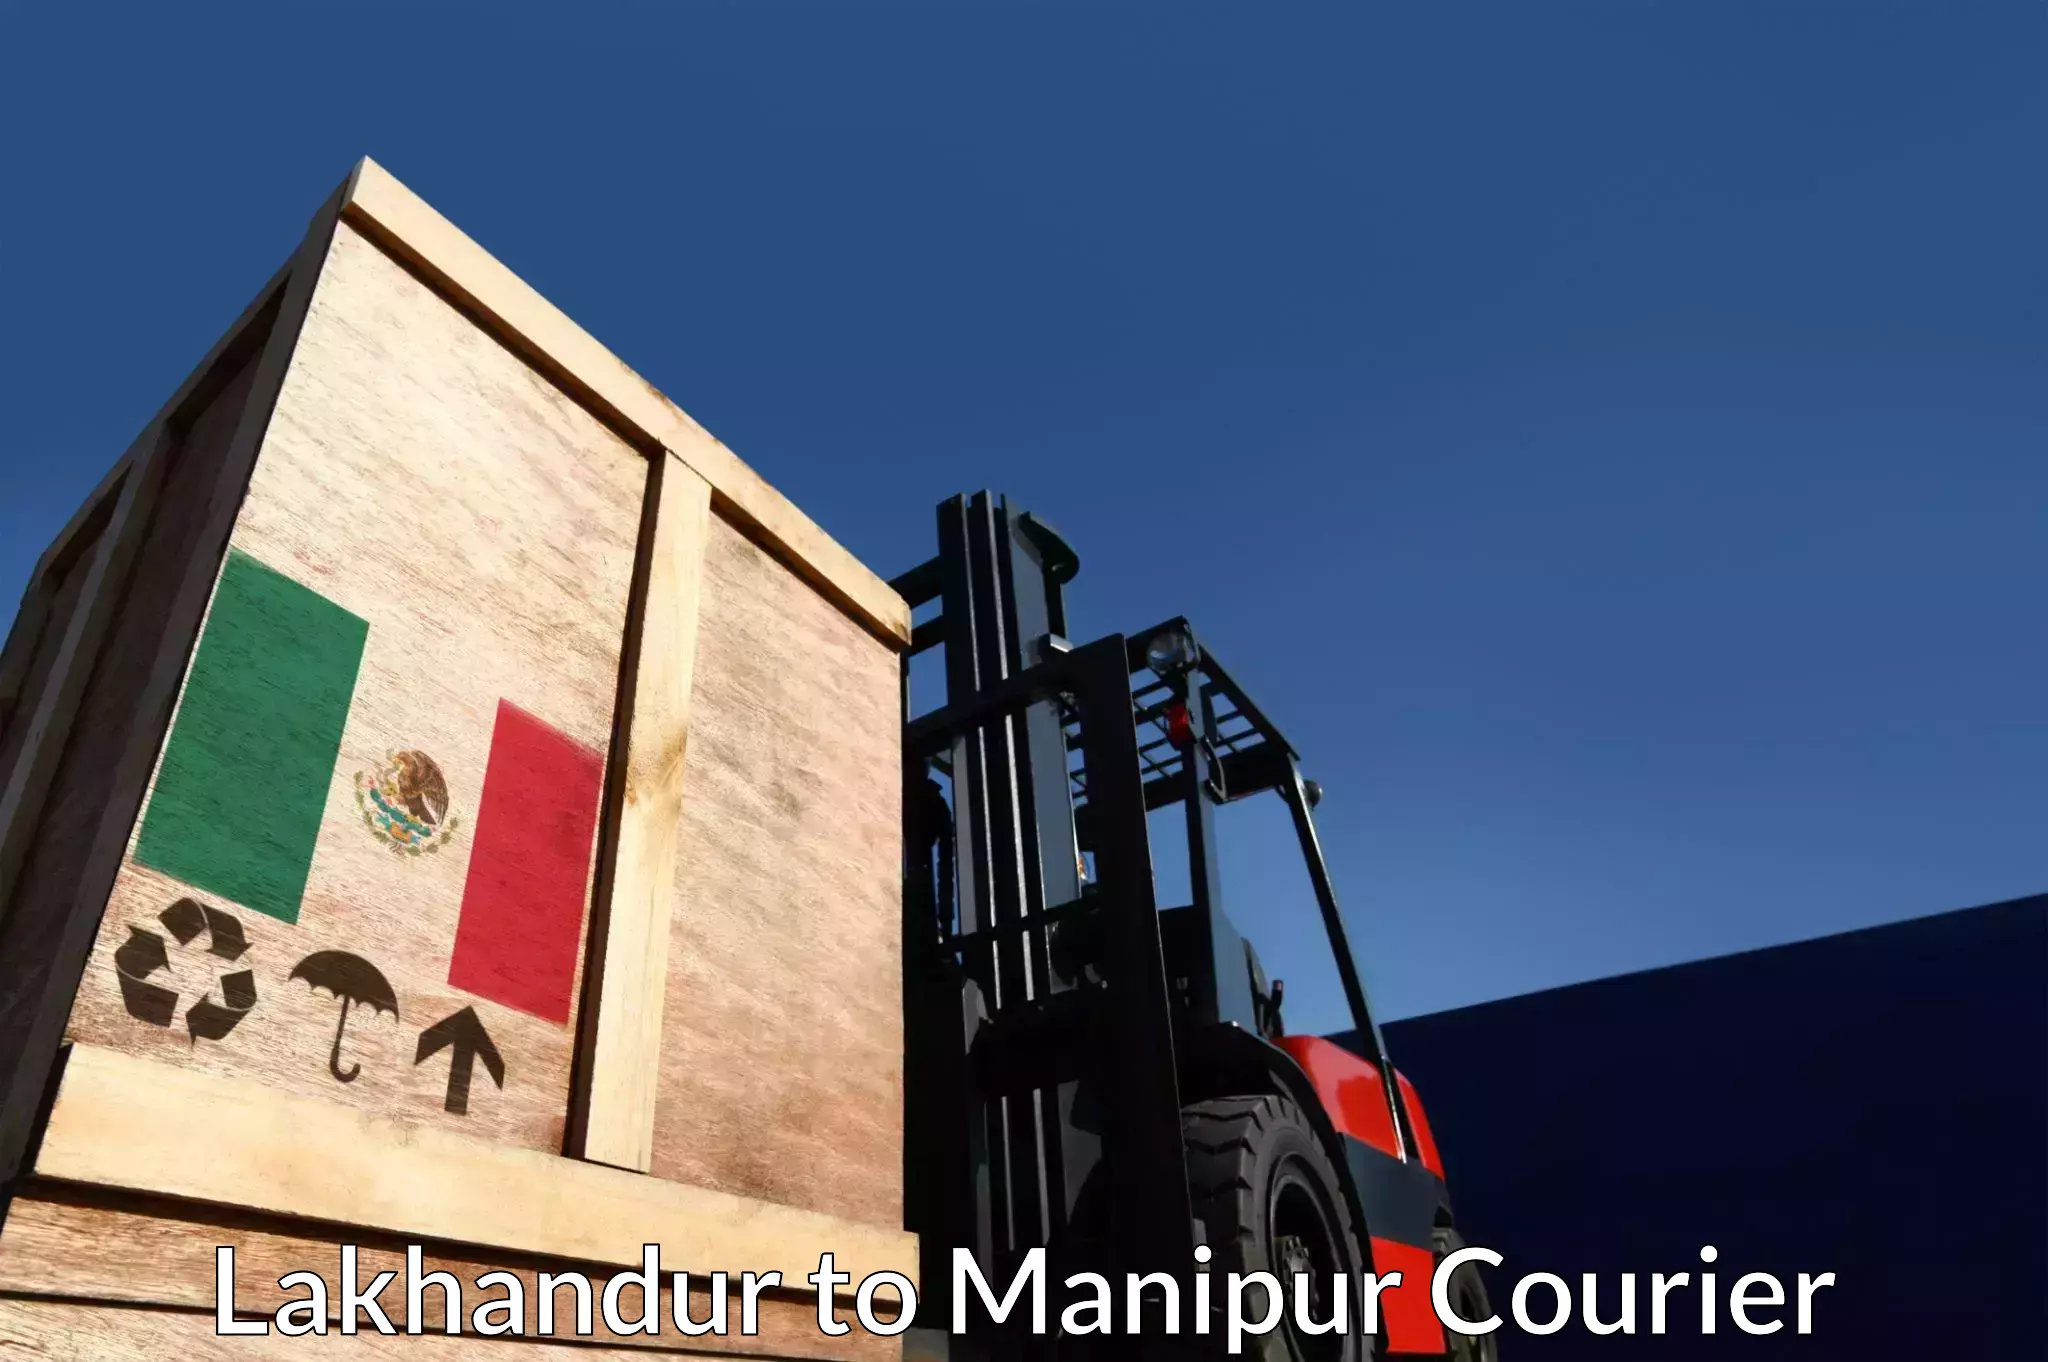 Multi-national courier services Lakhandur to Manipur